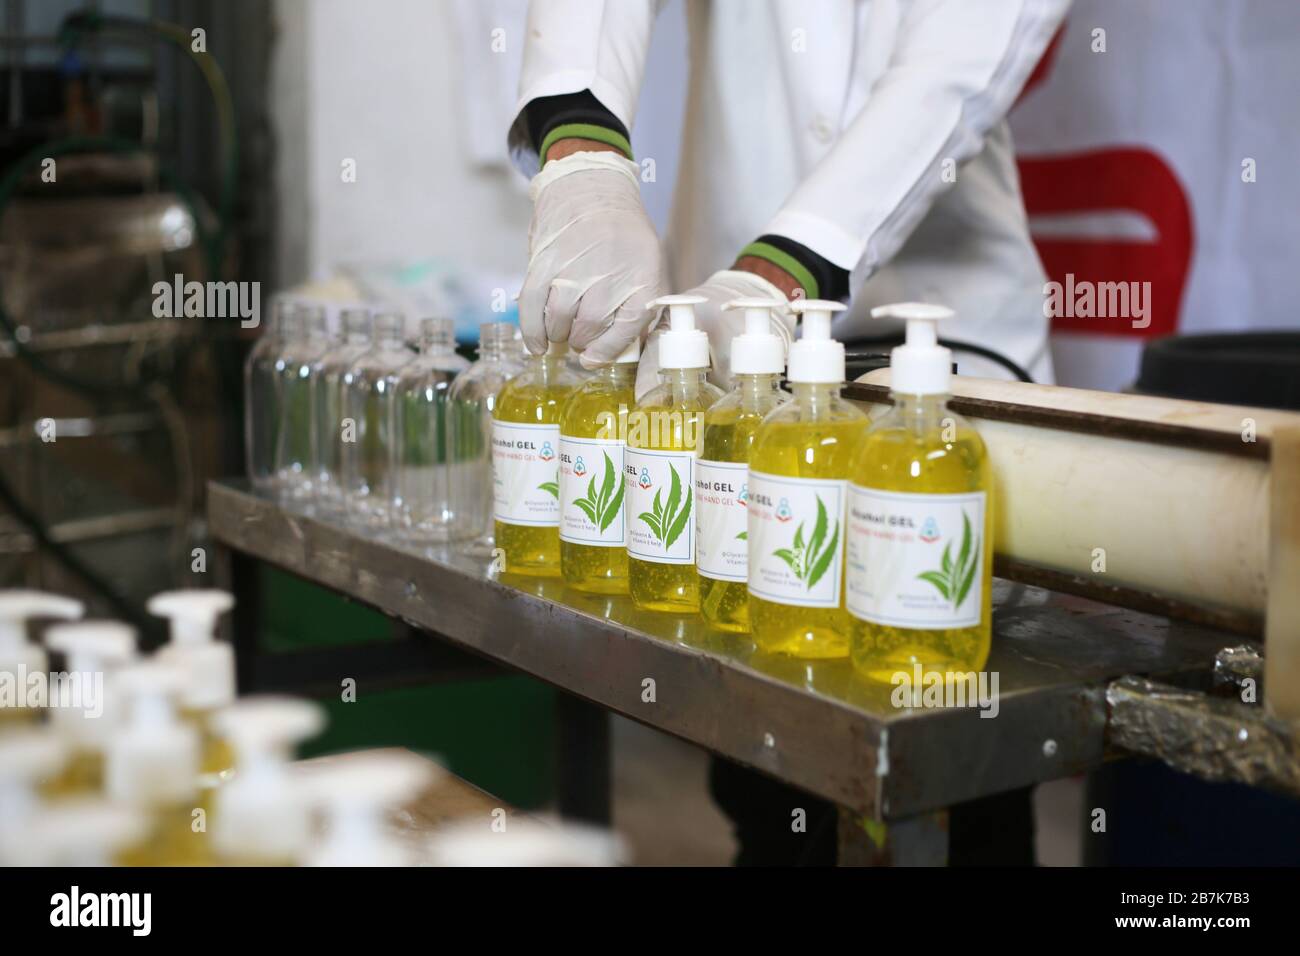 Gaza. 16th Mar, 2020. A Palestinian worker works on the production line of sterilizing gel at a cleaning materials factory in the southern Gaza Strip city of Rafah, March 16, 2020. Gaza authorities declared a new set of precautionary measures amid concerns about the spread of the novel coronavirus in the coastal enclave. Credit: Khaled Omar/Xinhua/Alamy Live News Stock Photo